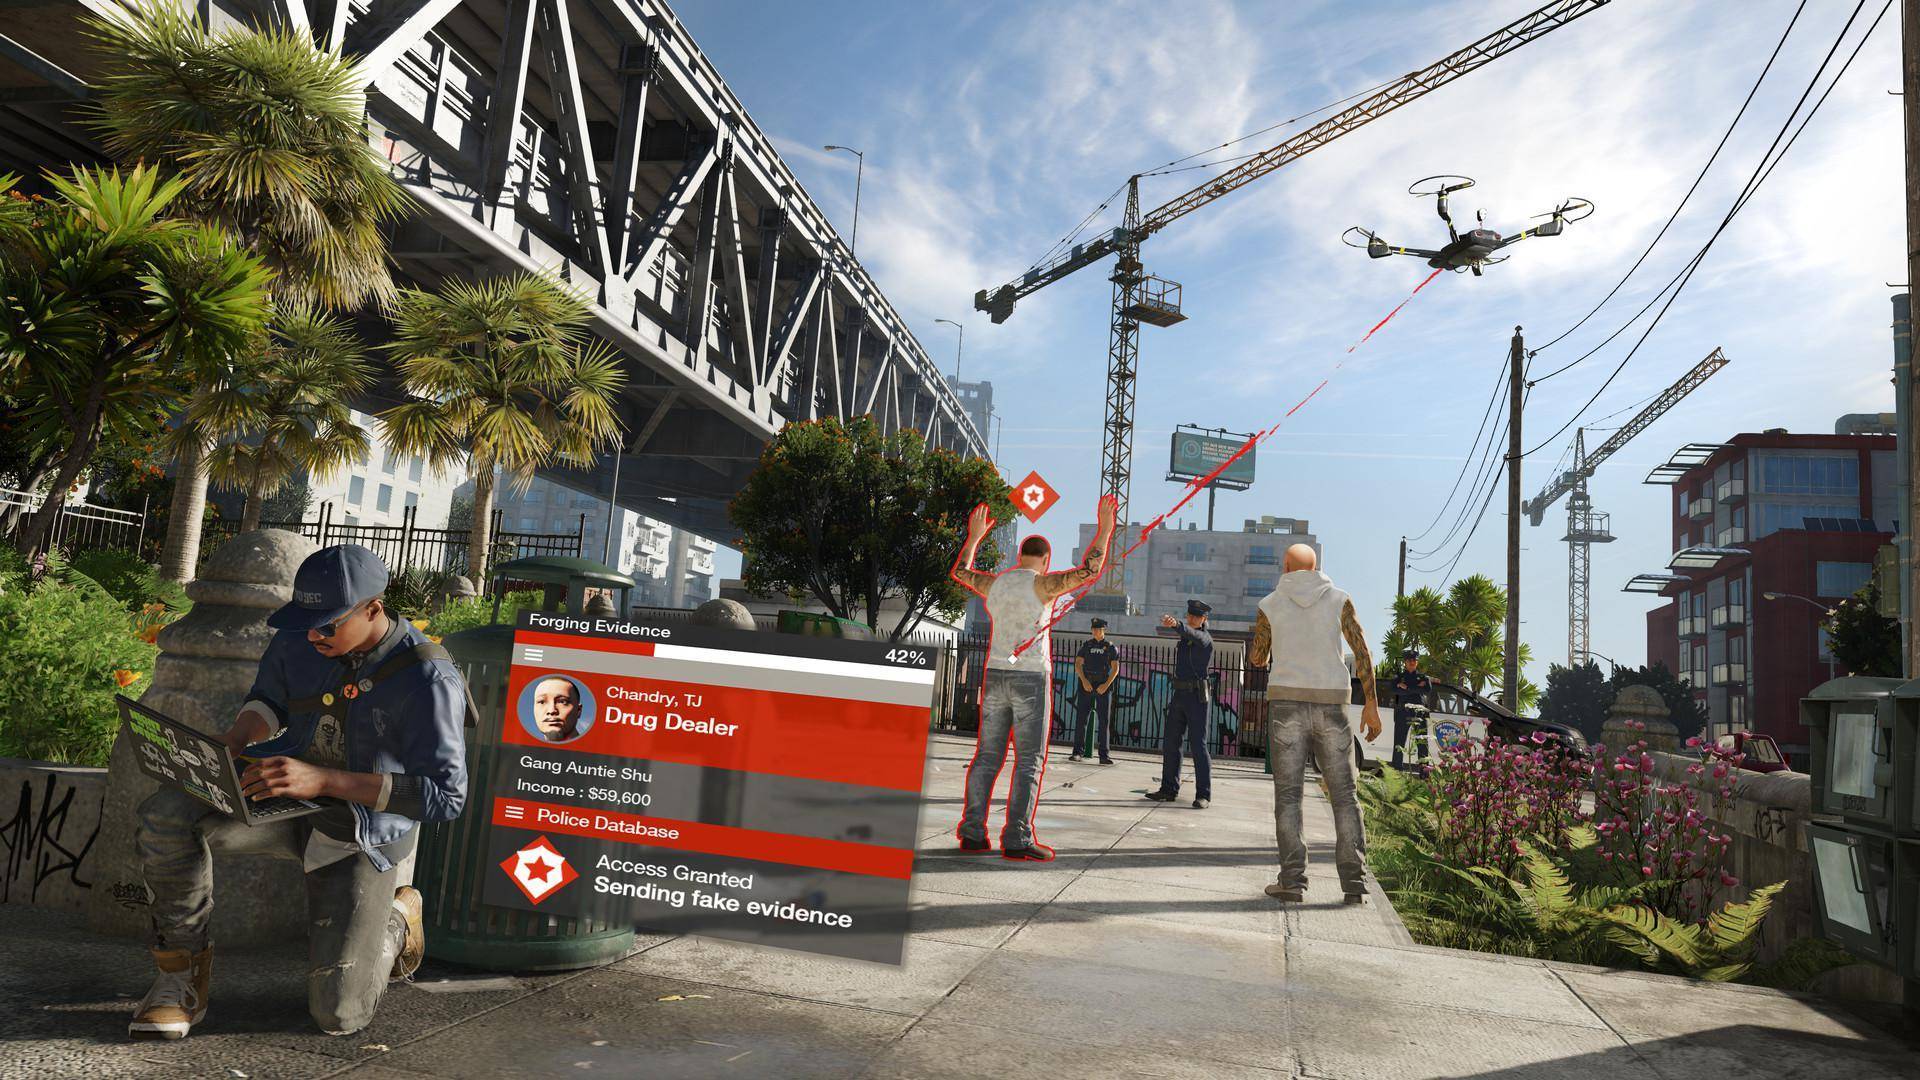 Watch Dogs 2 Deluxe Edition Pc Key Cheap Price Of 11 27 For Uplay